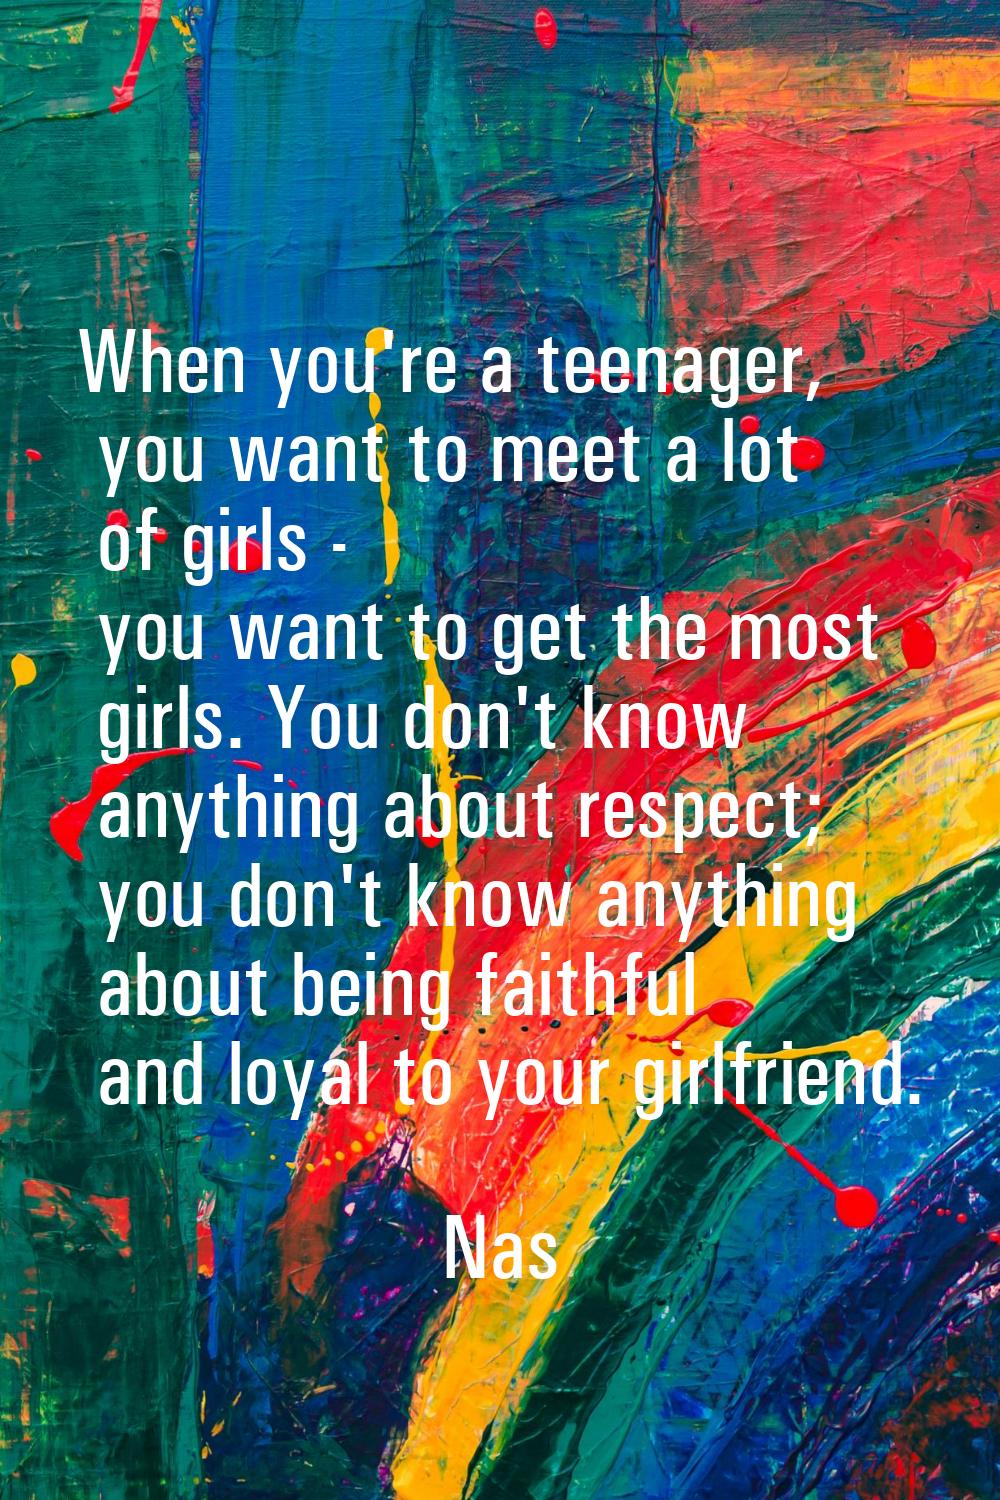 When you're a teenager, you want to meet a lot of girls - you want to get the most girls. You don't